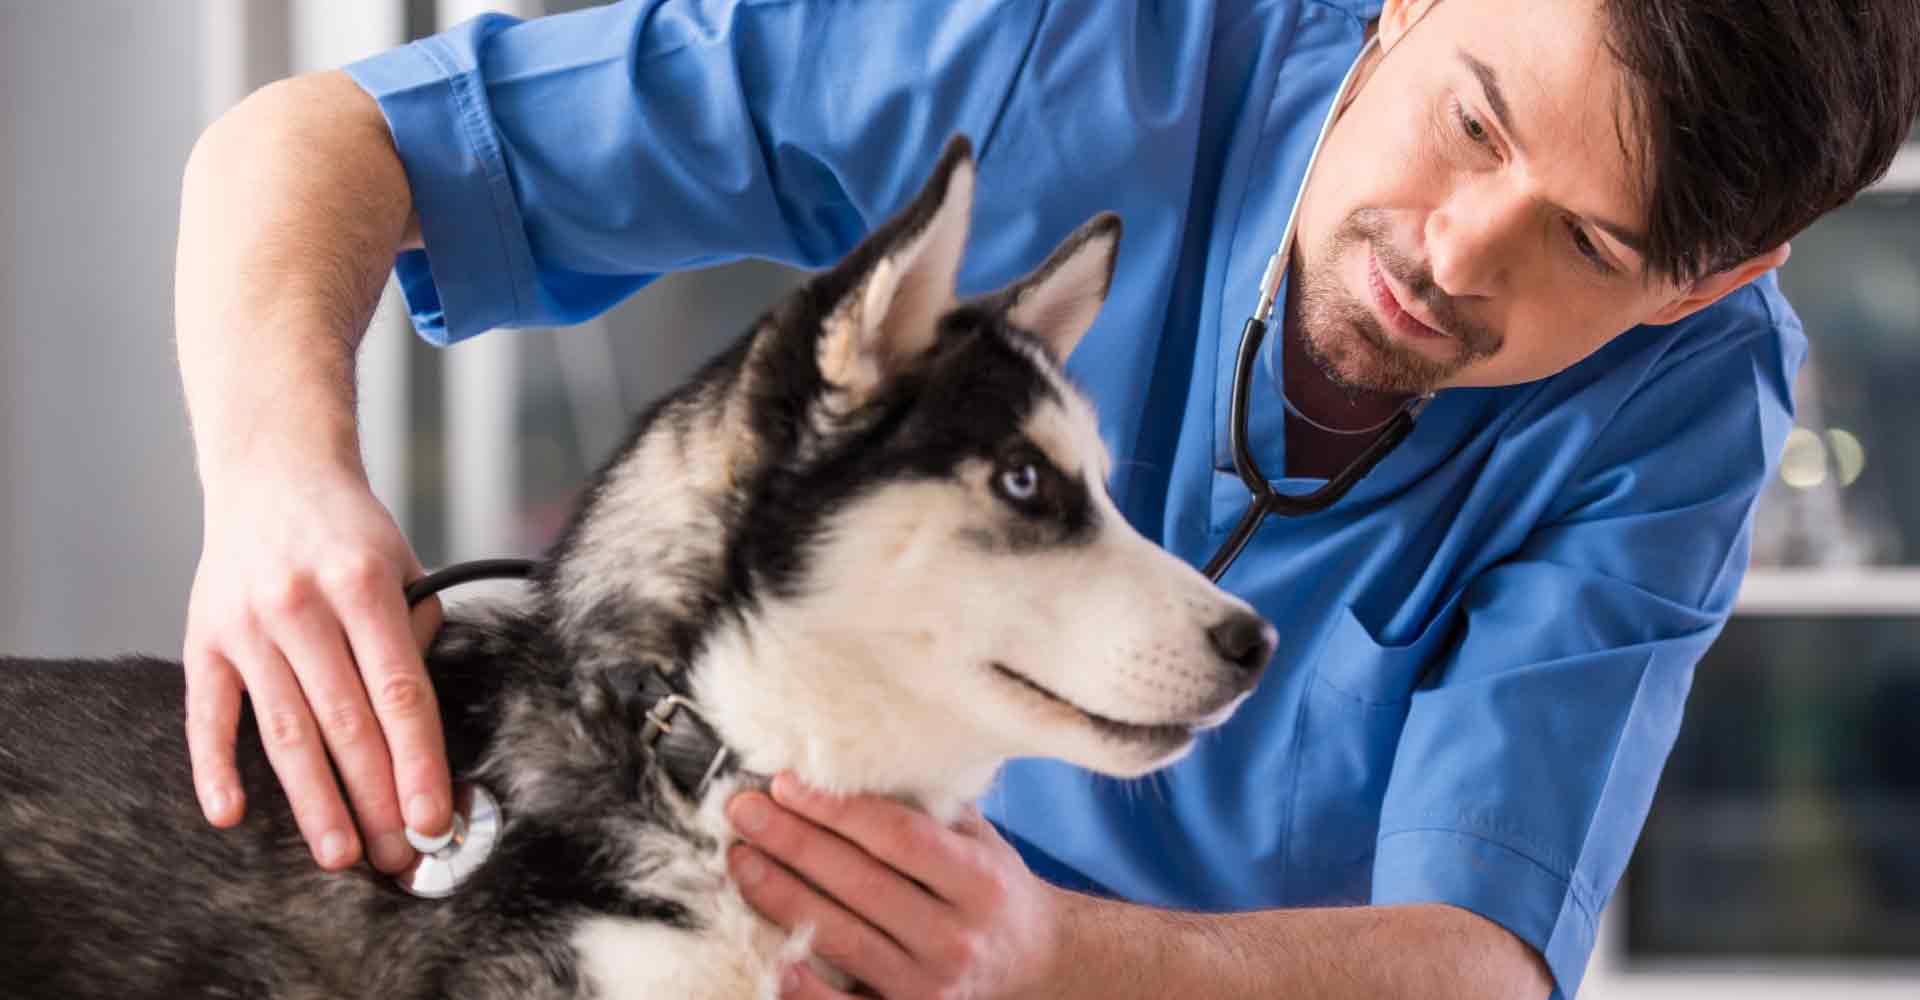 A Vet taking care of a dog while a Veterinarian Answering Service takes care of his urgent calls